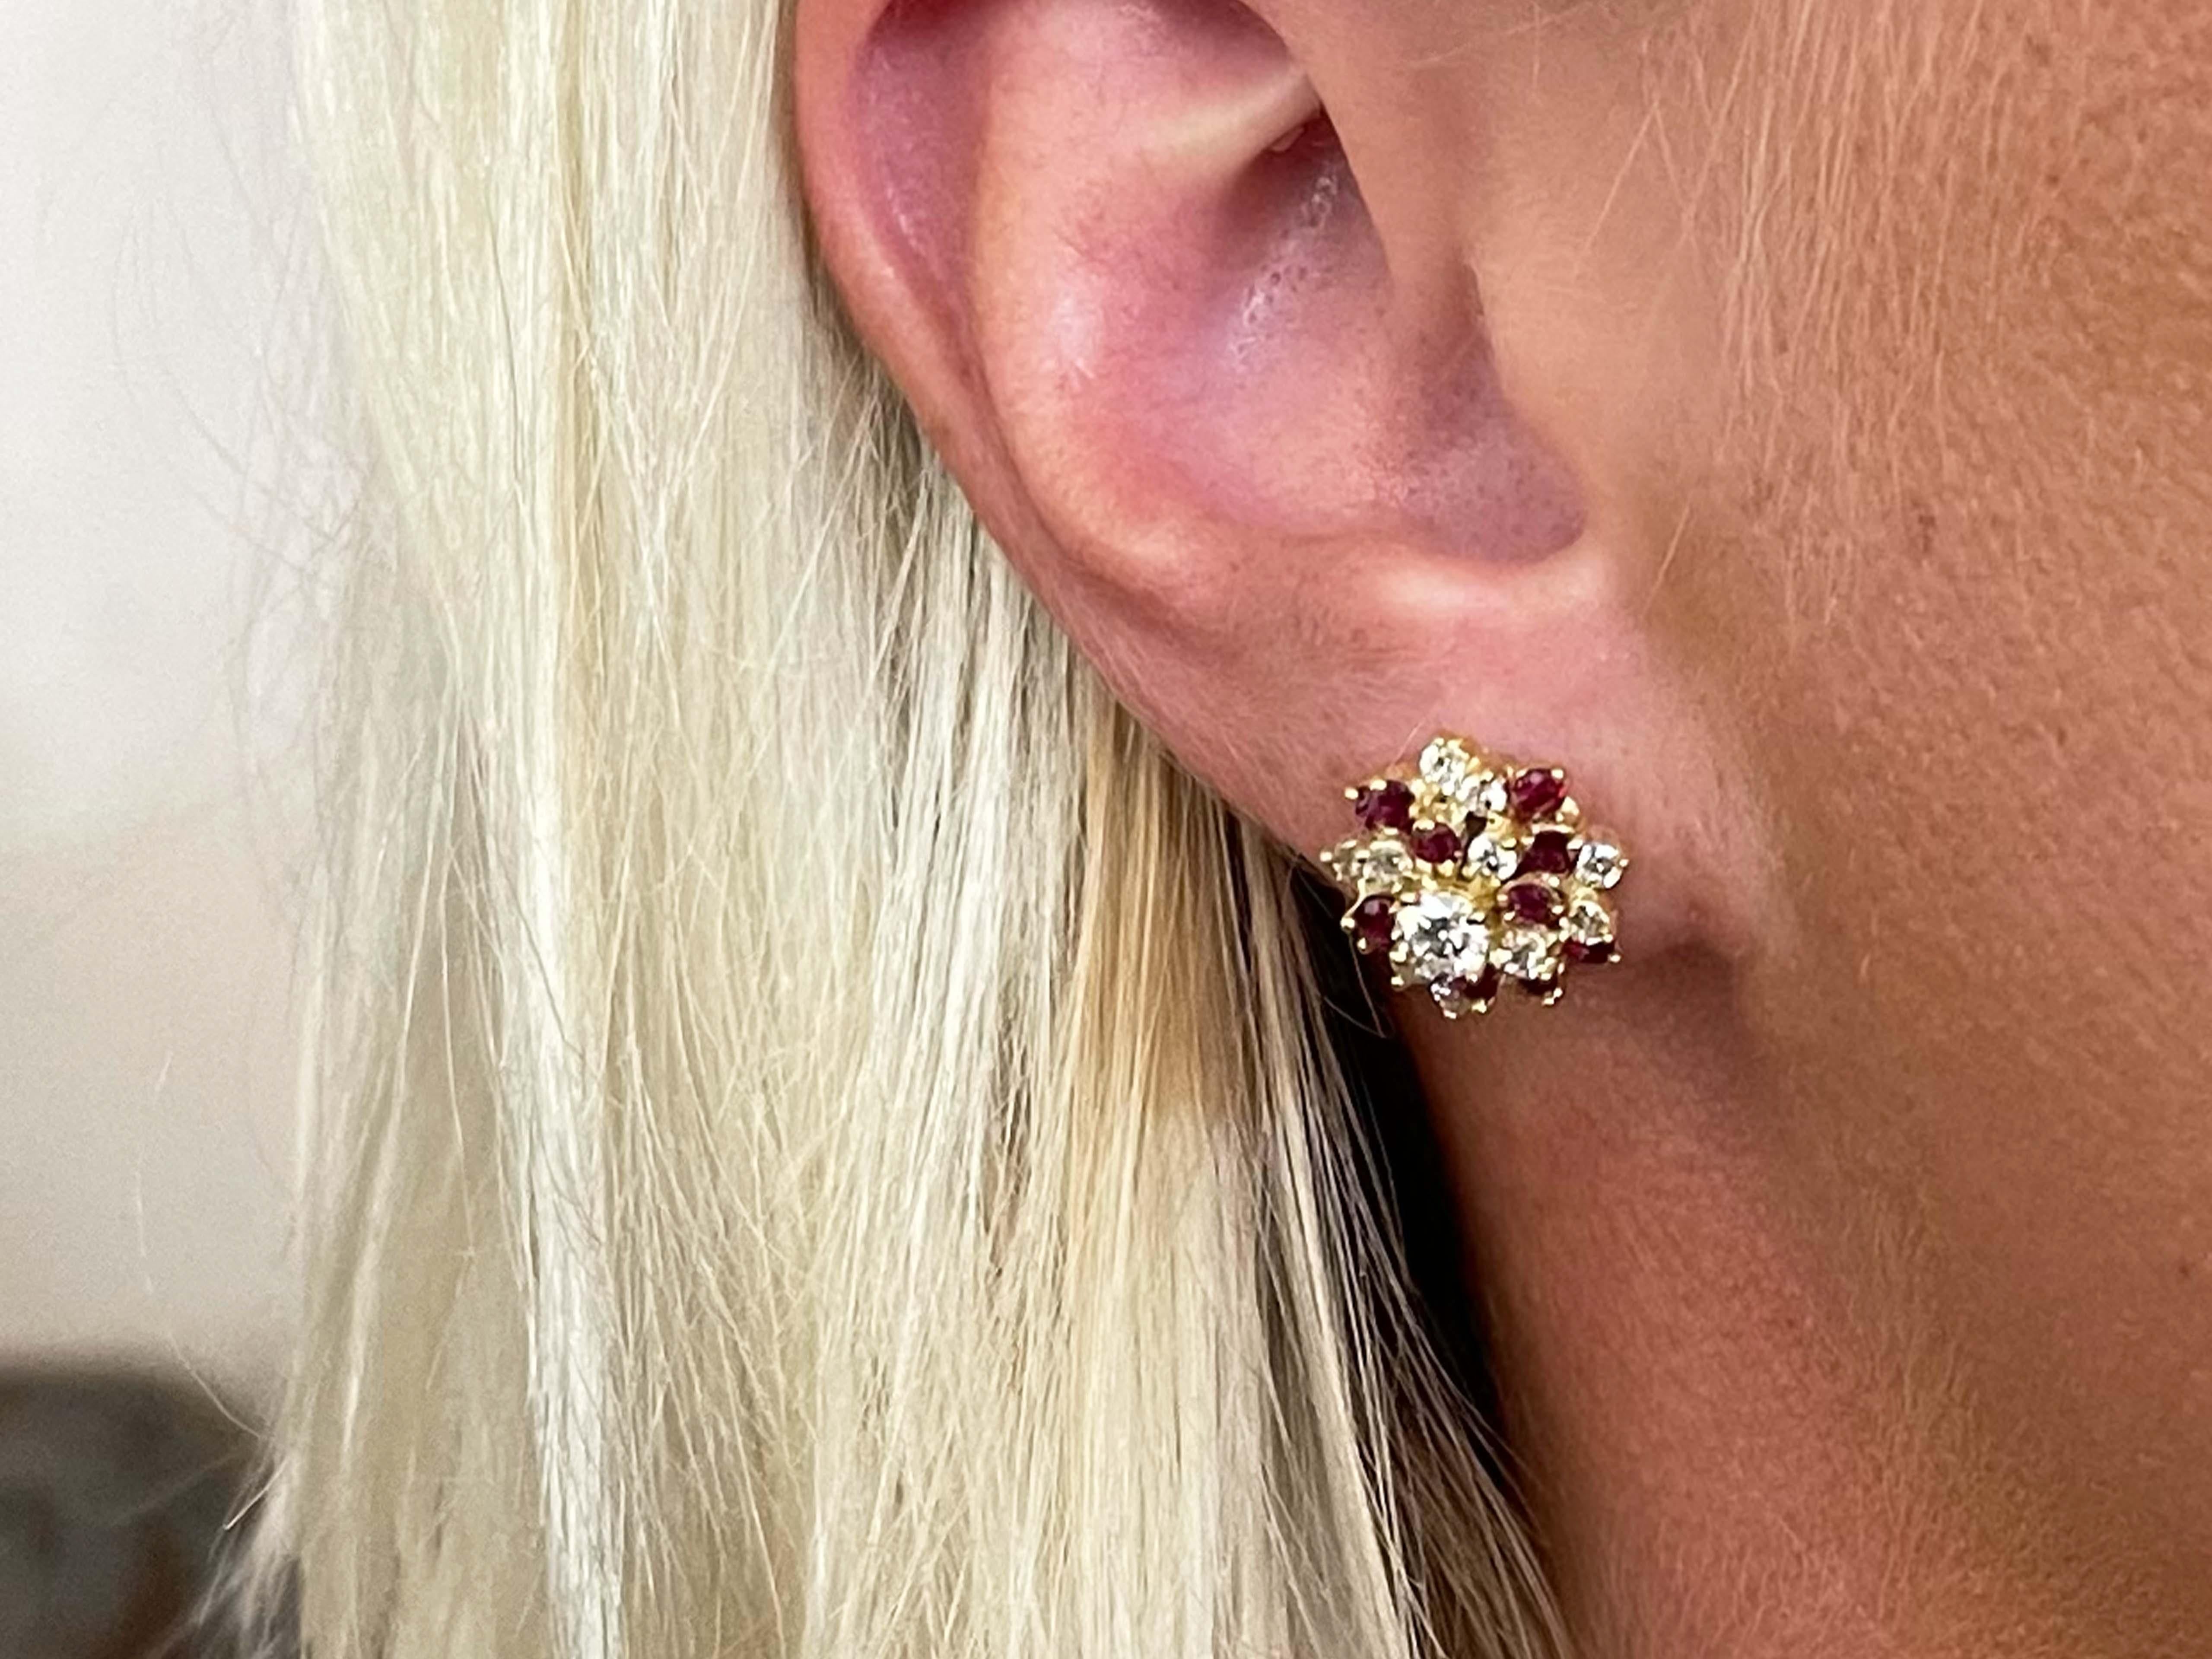 Earrings Specifications:

Metal: 14k Yellow Gold

Earring Diameter: 13.8 mm

Total Weight: 4.9 Grams

Diamond Count: 26 brilliant cut

Diamond Color: F-G

Diamond Clarity: VS2-SI1

Ruby Setting: Prong

Ruby Total Count: 24

Ruby Carat Weight: ~0.70